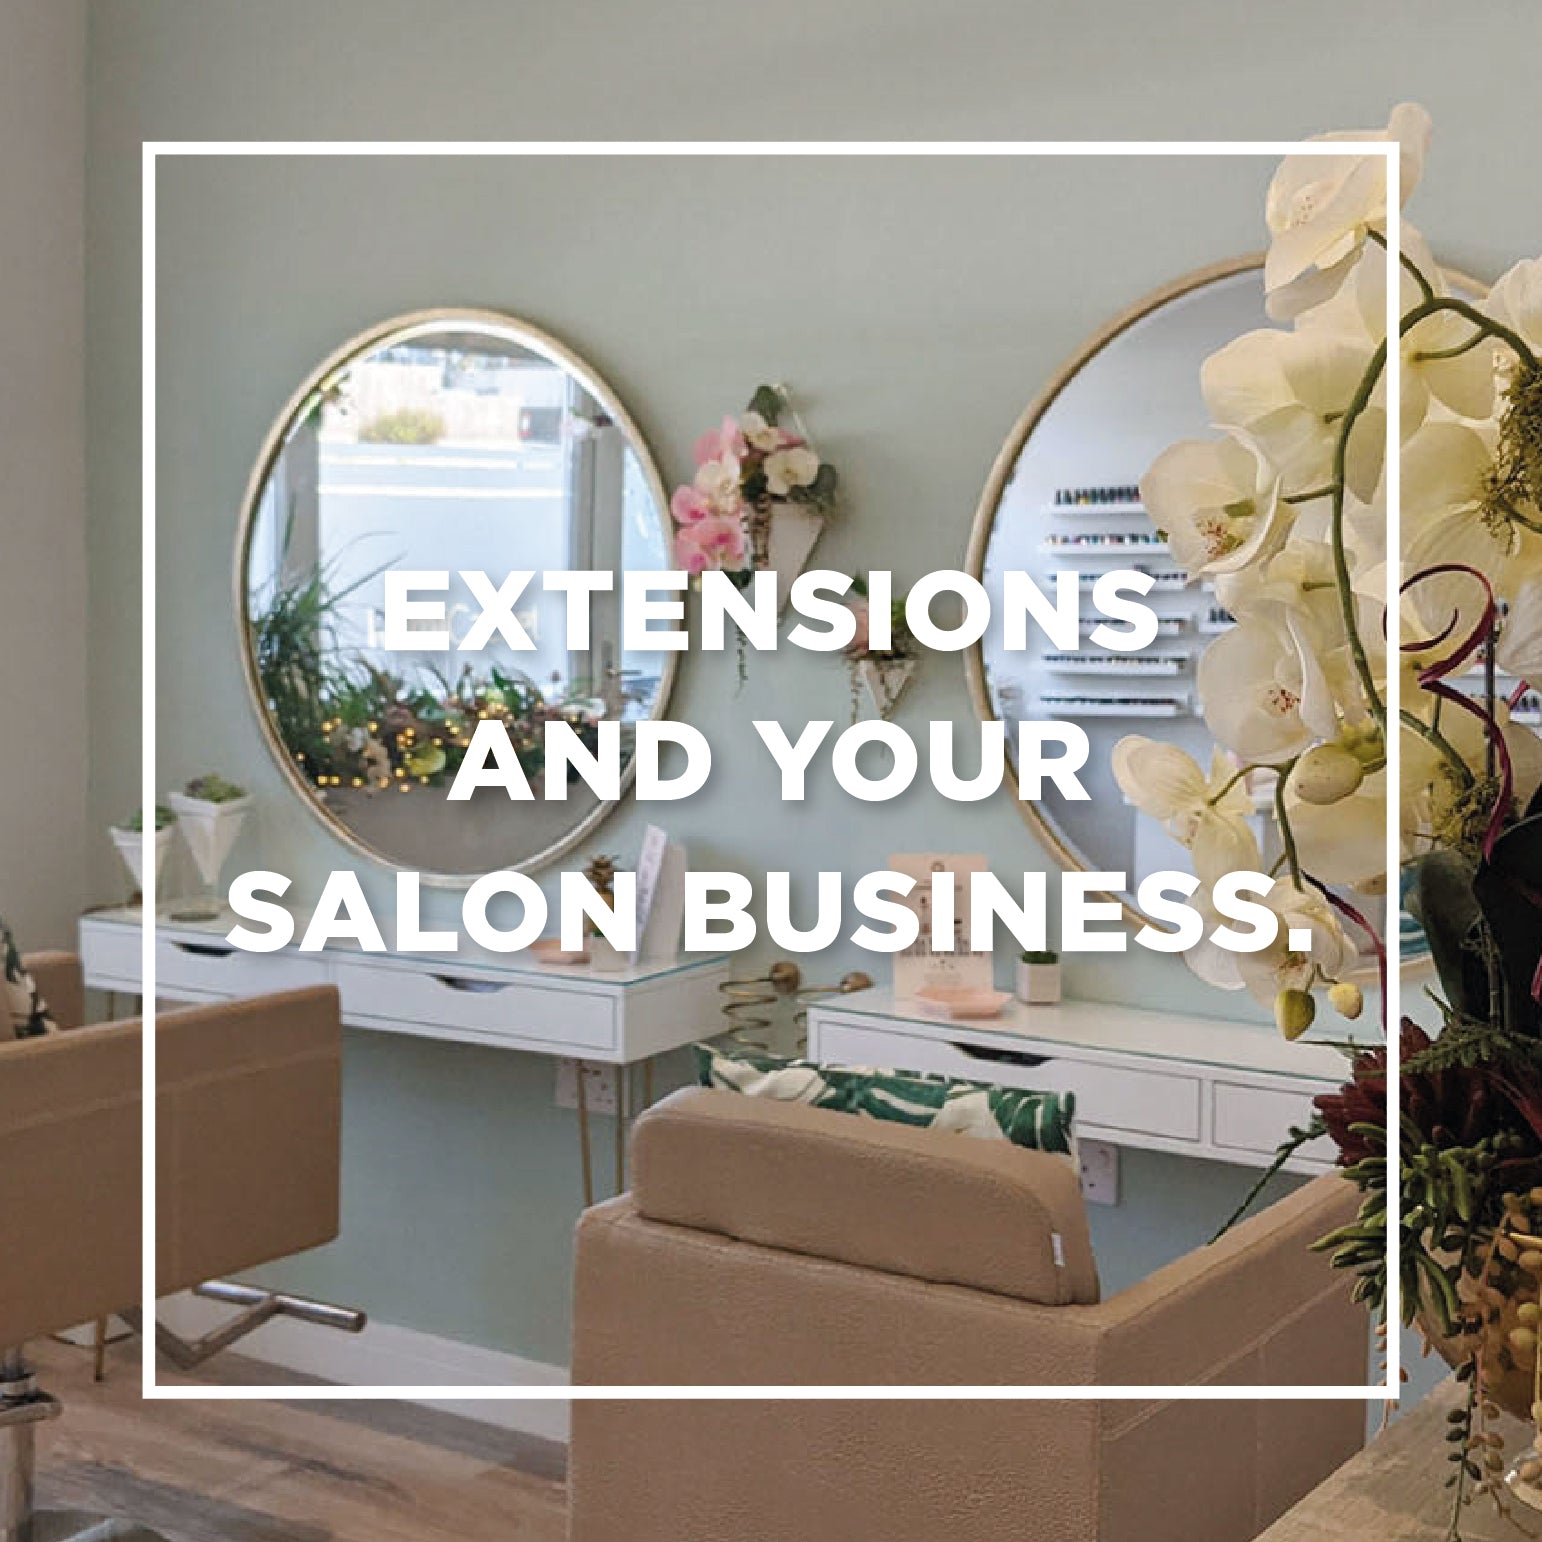 Making extensions a successful part of your salon business